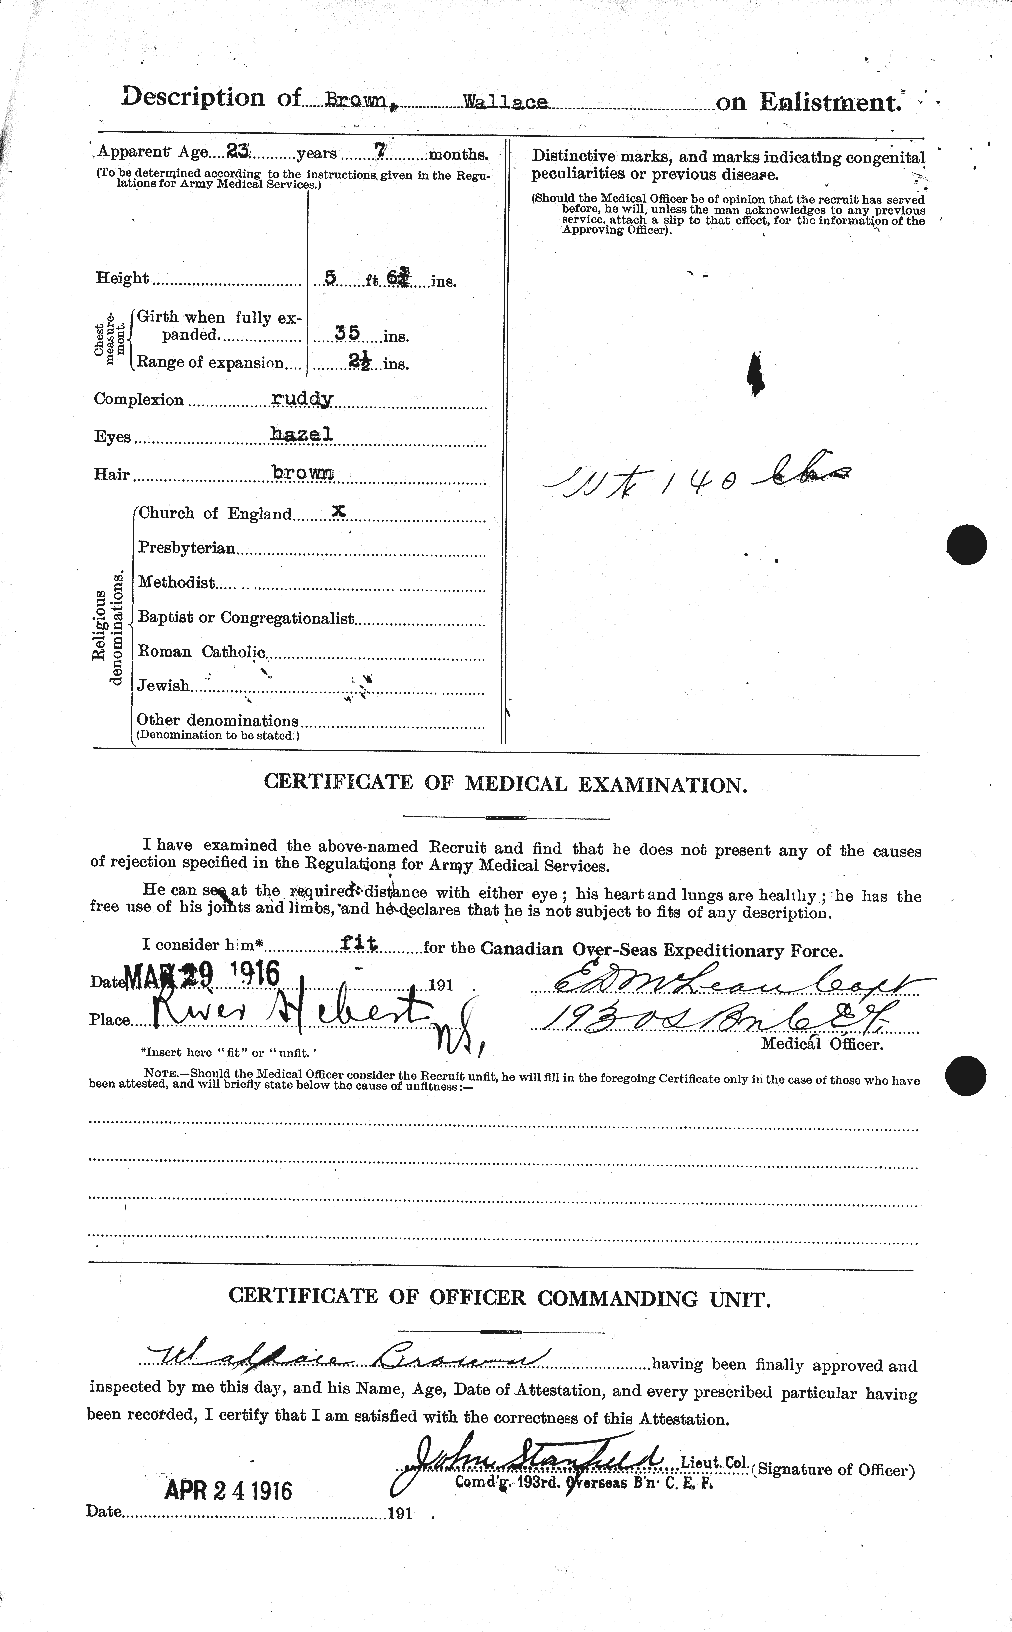 Personnel Records of the First World War - CEF 266628b